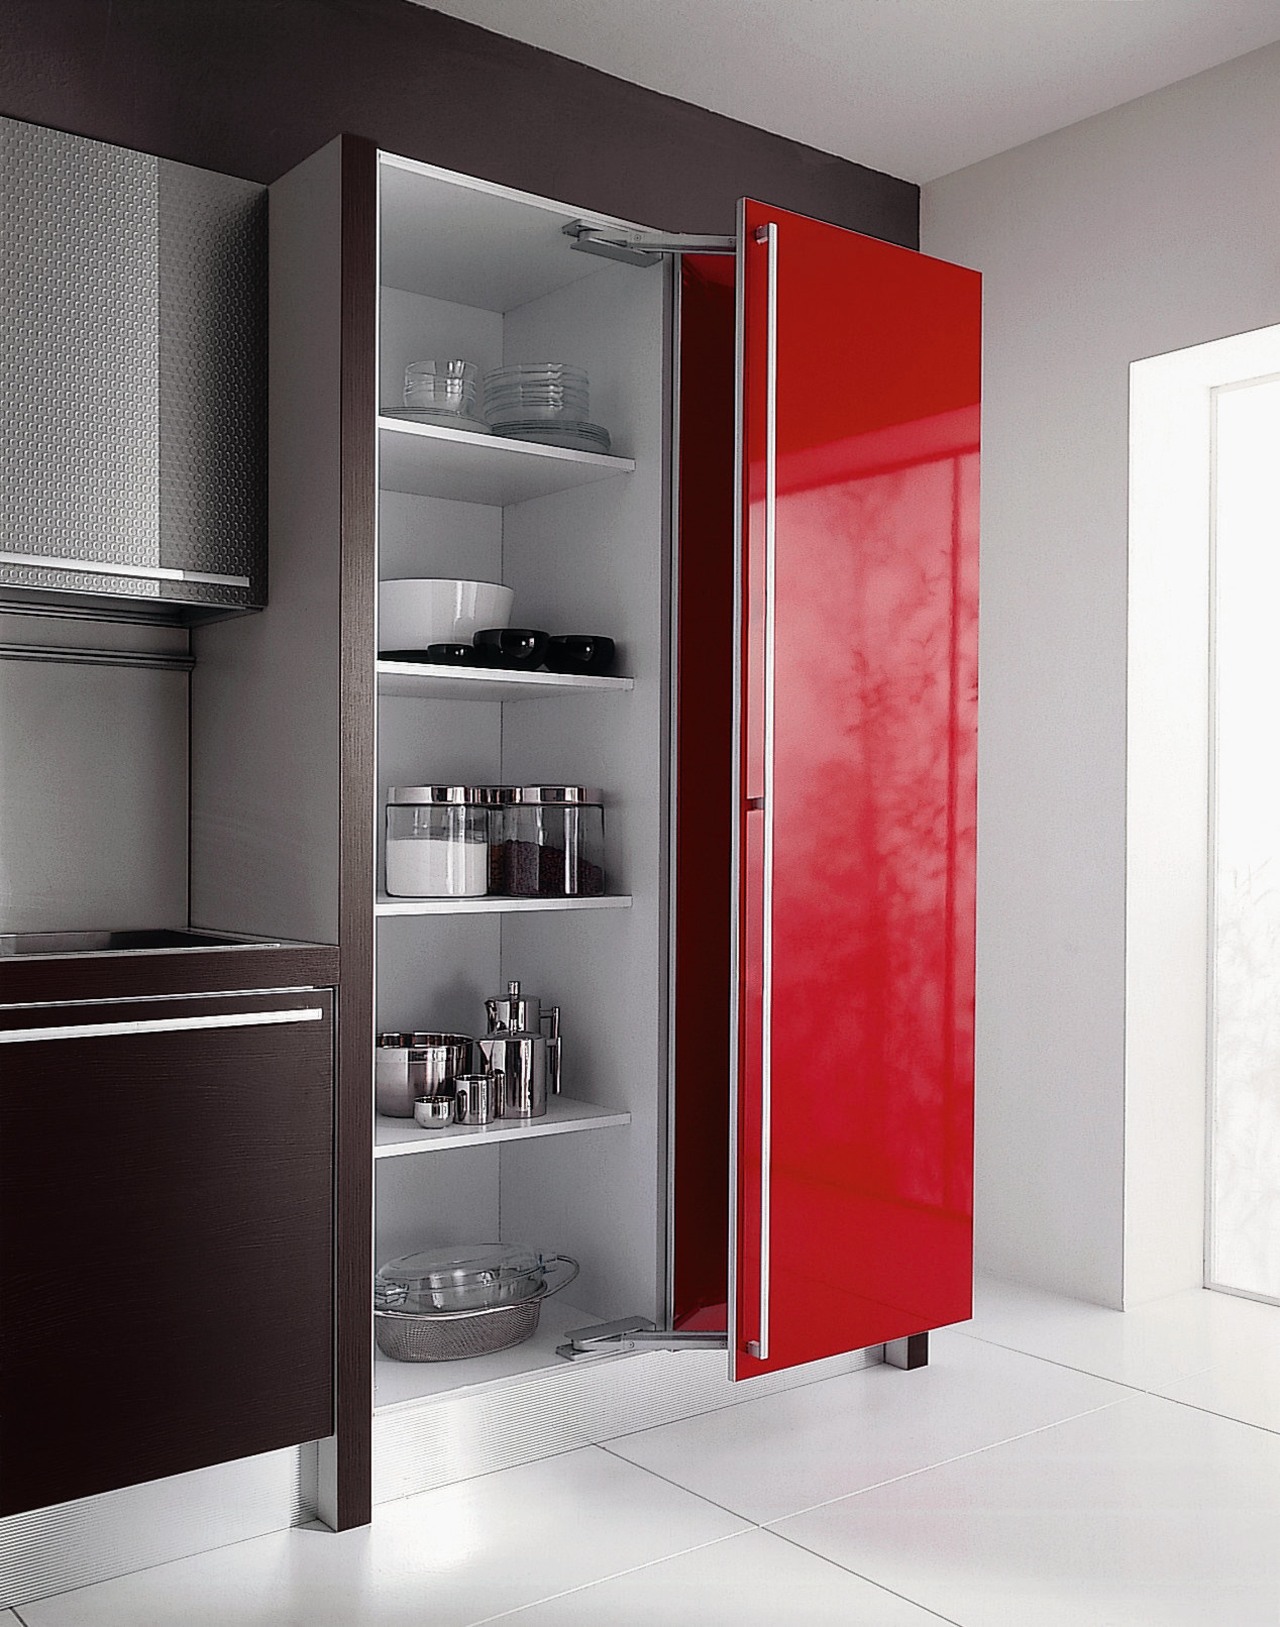 View of this kitchen cabinetry in oriental red bathroom accessory, bathroom cabinet, cabinetry, display case, furniture, product design, shelf, shelving, wardrobe, gray, white